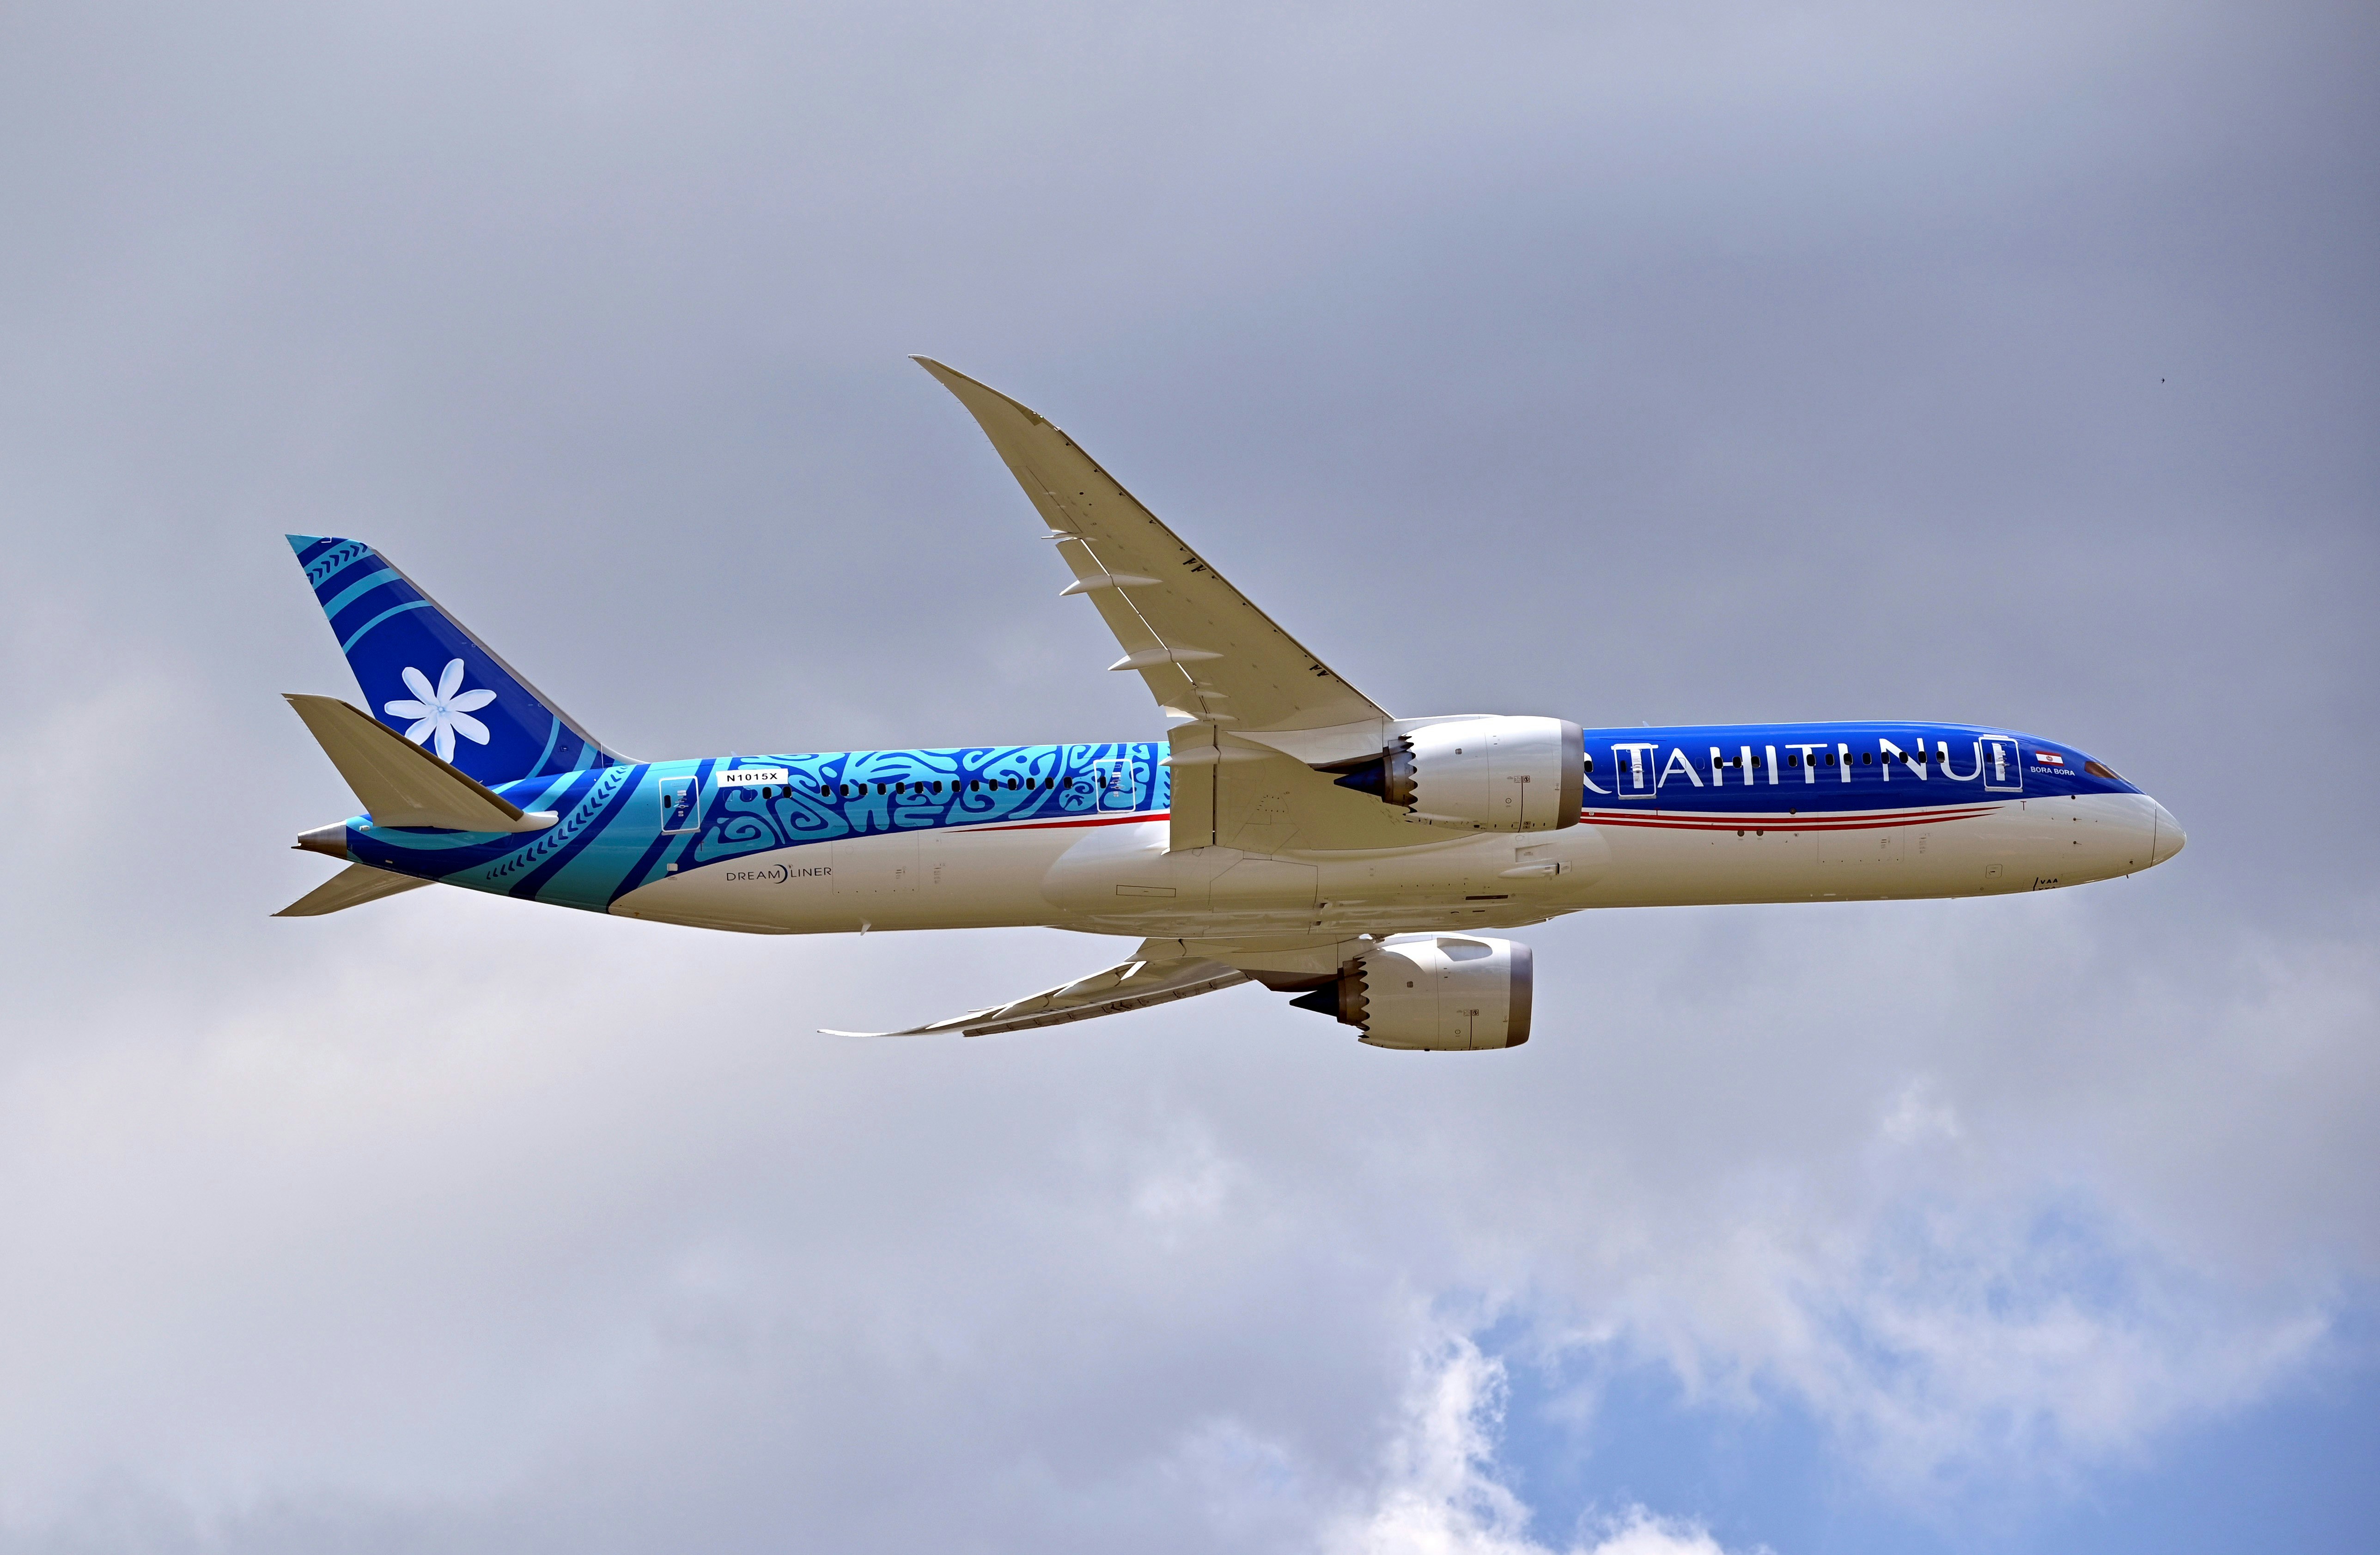 A Boeing 787-9 Dreamliner of Air Tahiti Nui performs during the 53rd International Paris Air Show at Le Bourget Airport near Paris, France on June 18, 2019. 